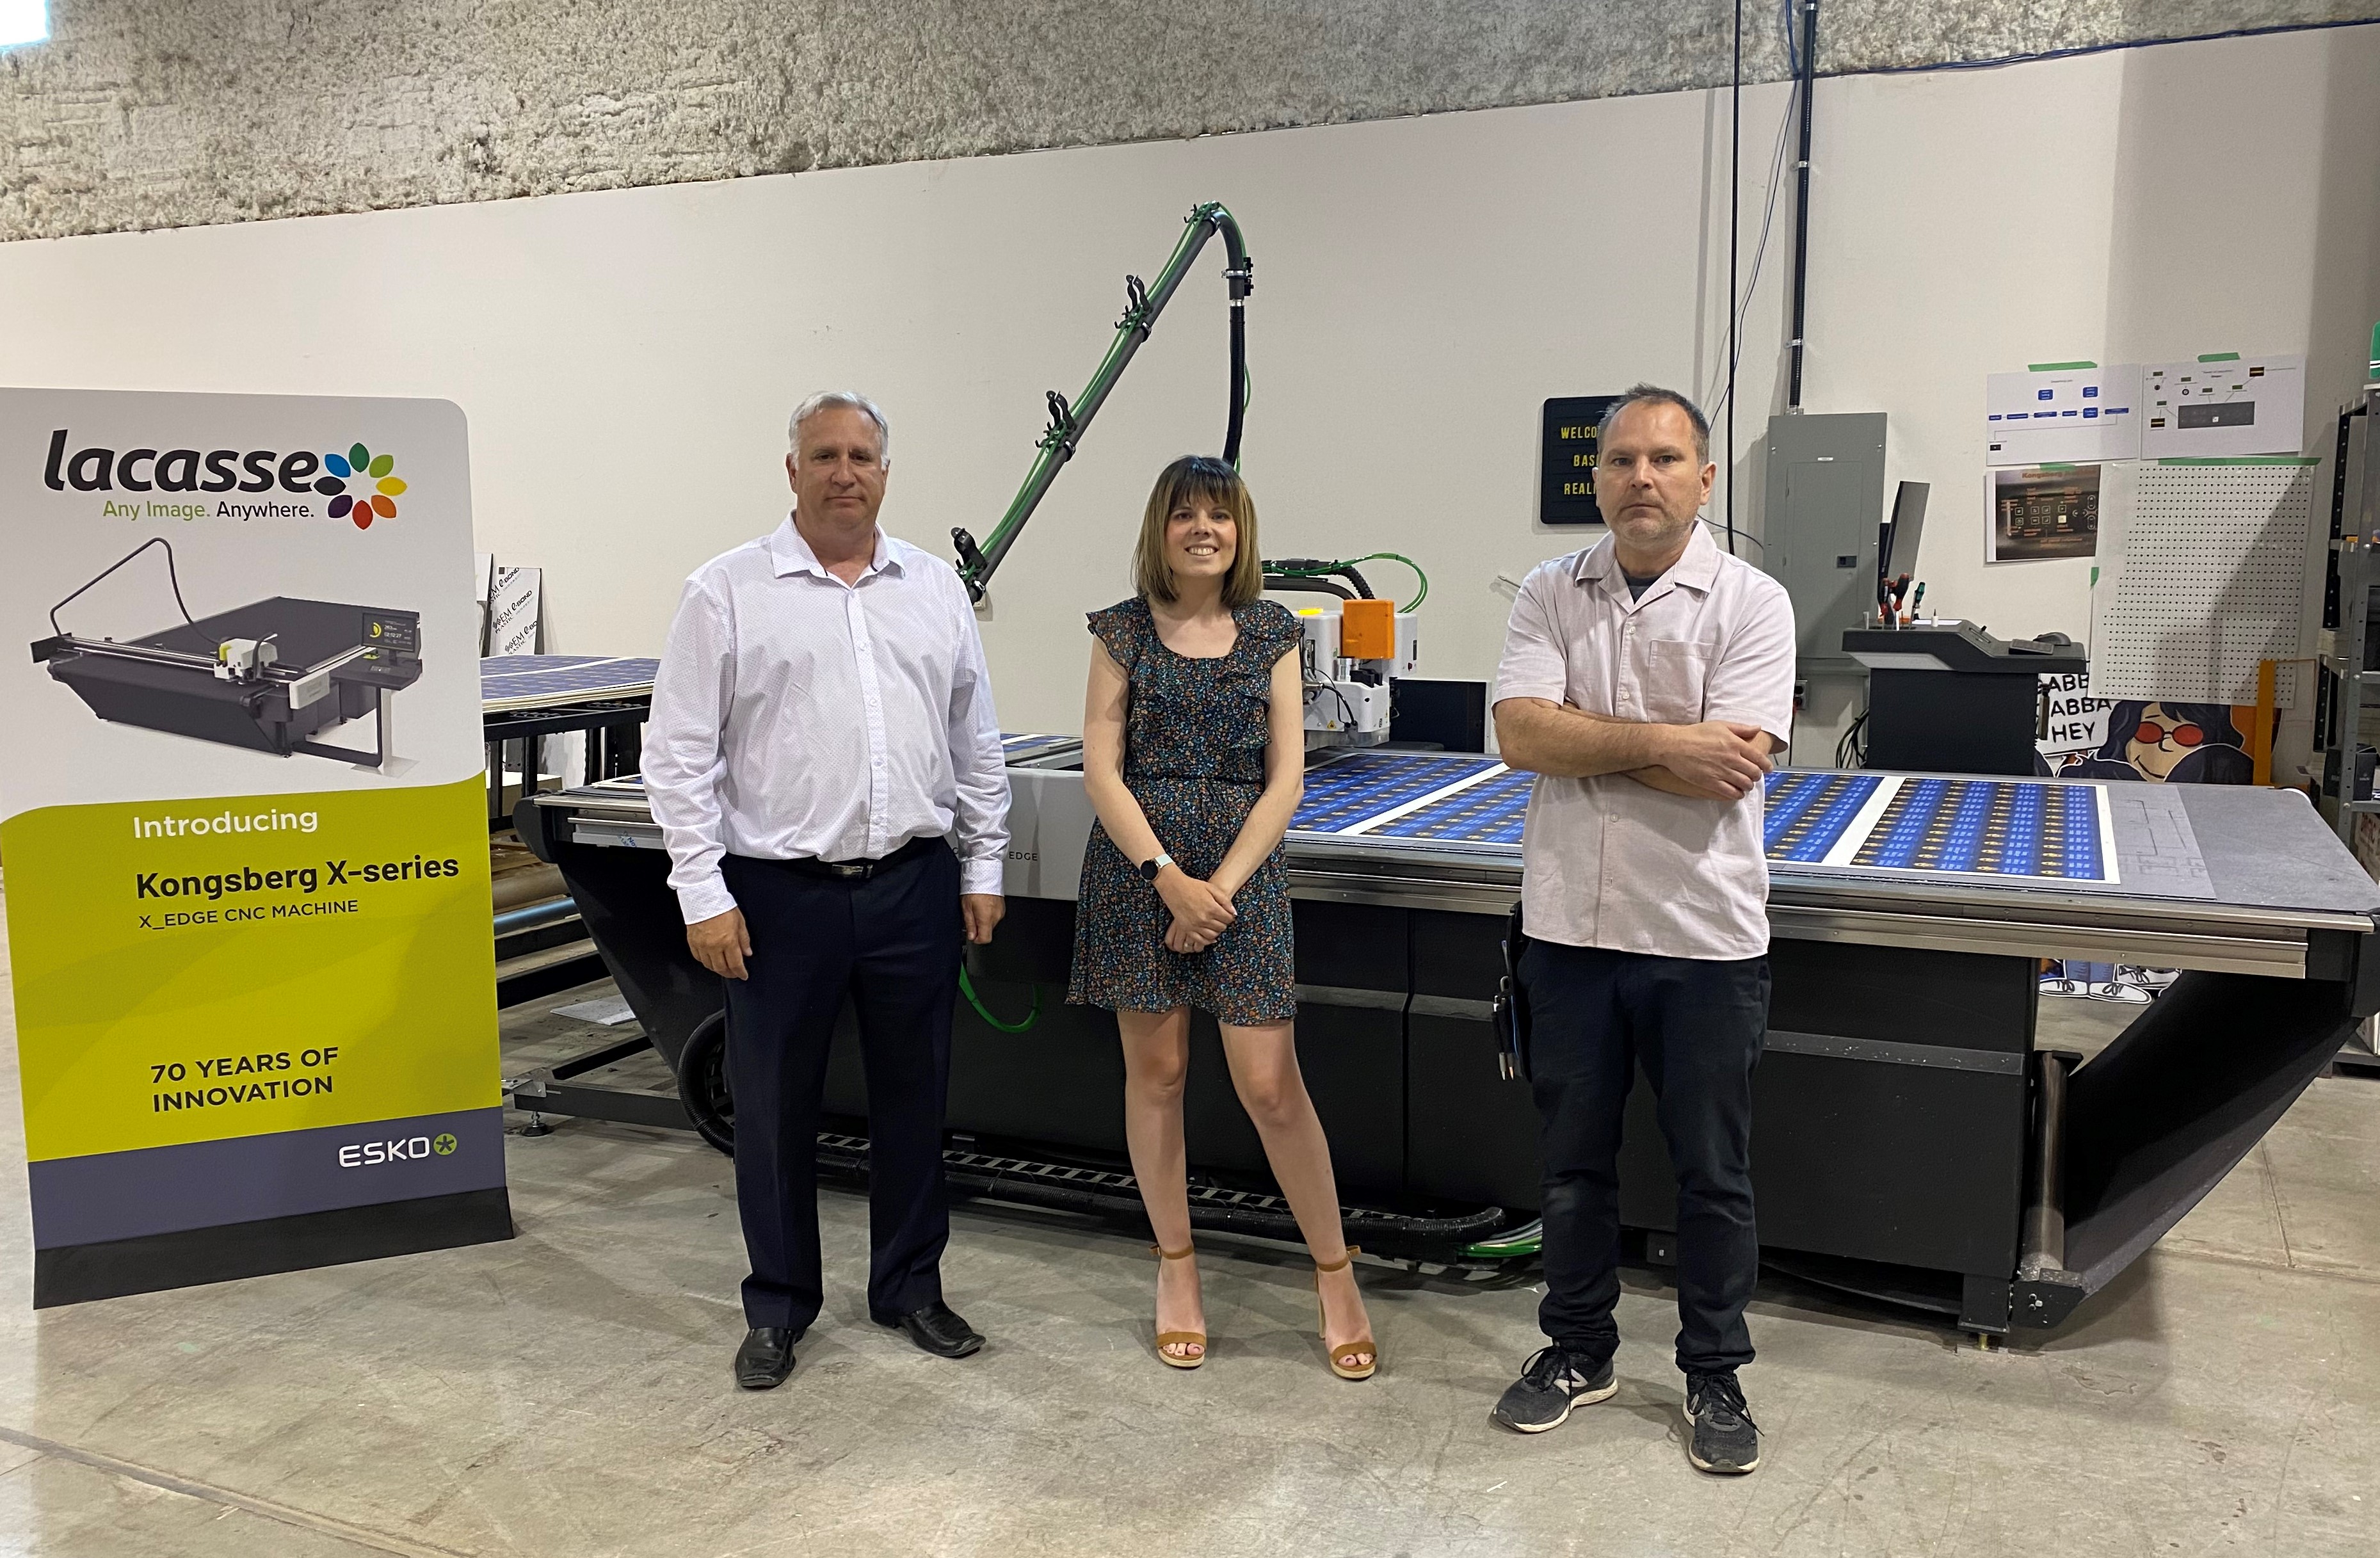 The Lacasse Printing team and their new Kongsberg X24